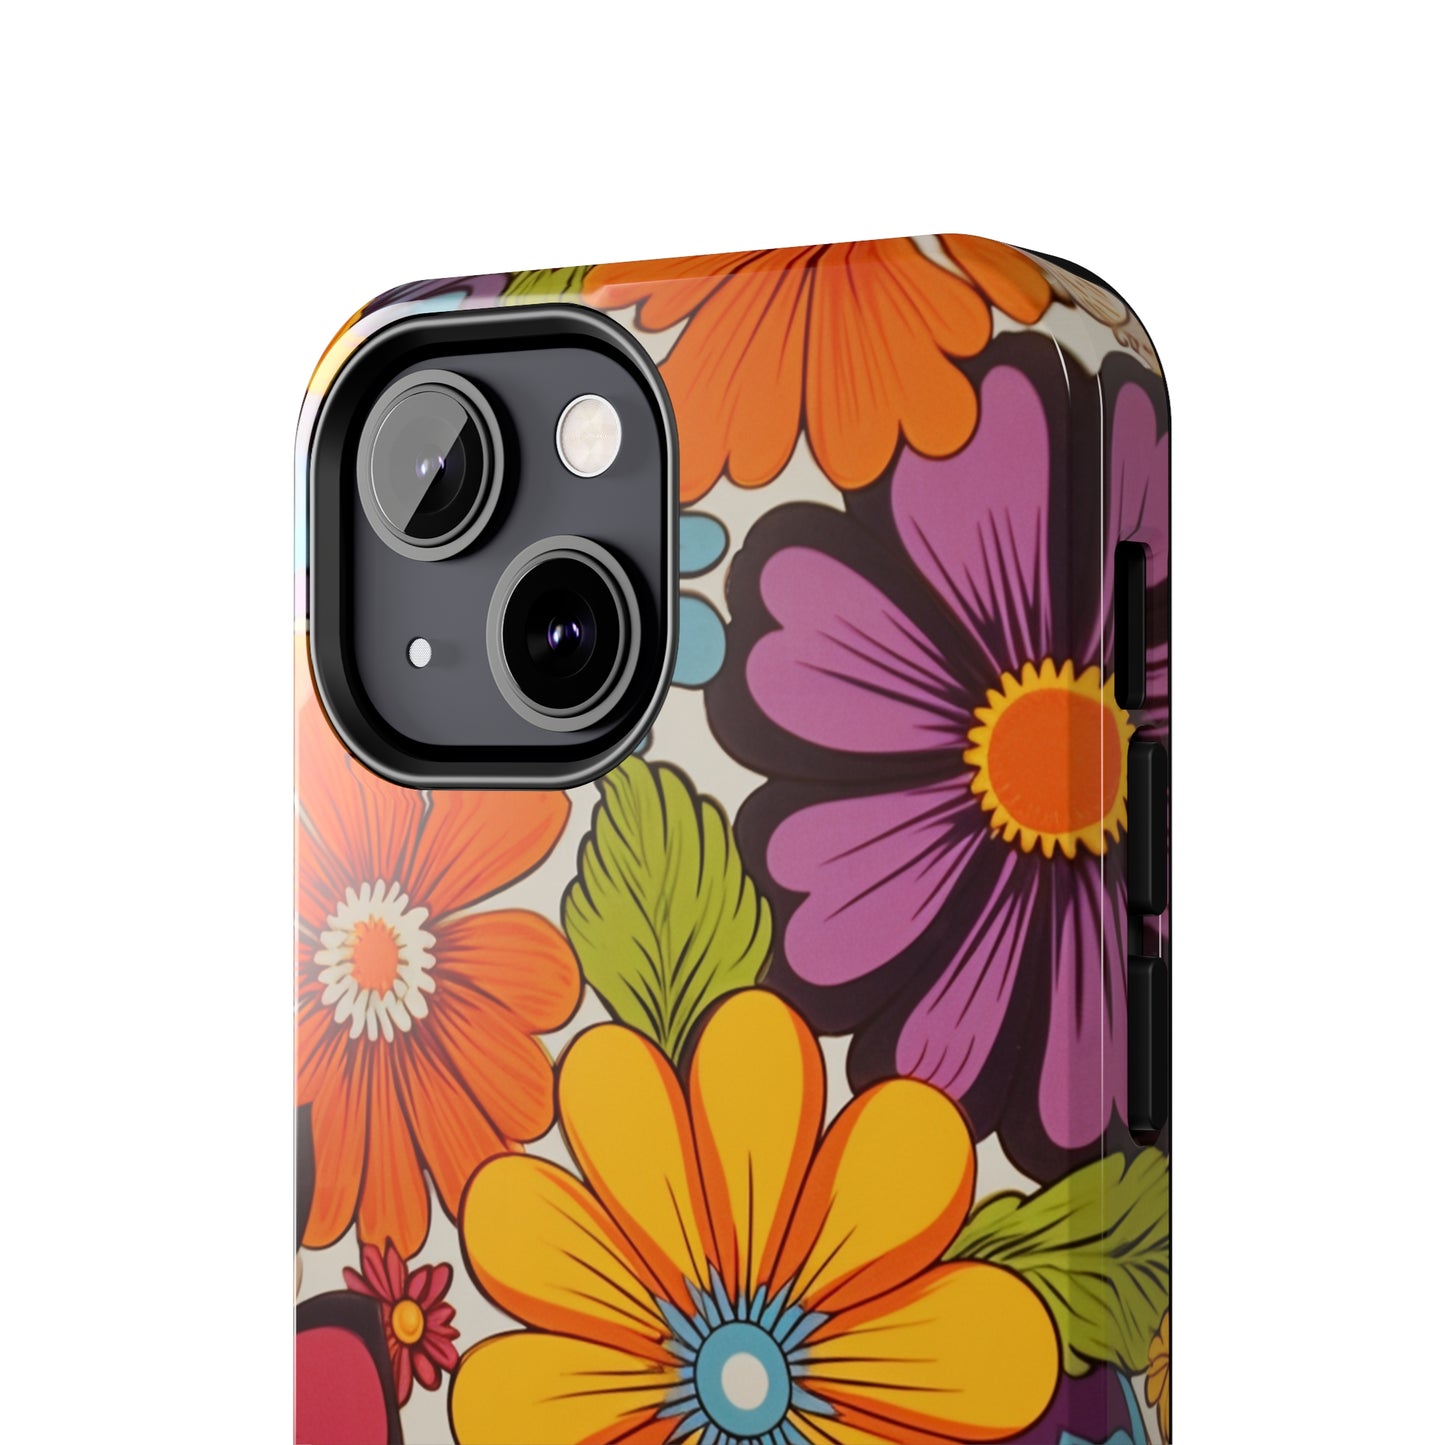 Groovy Garden: Trippy Hippie Psychedelic Floral Delights | Tough iPhone Case